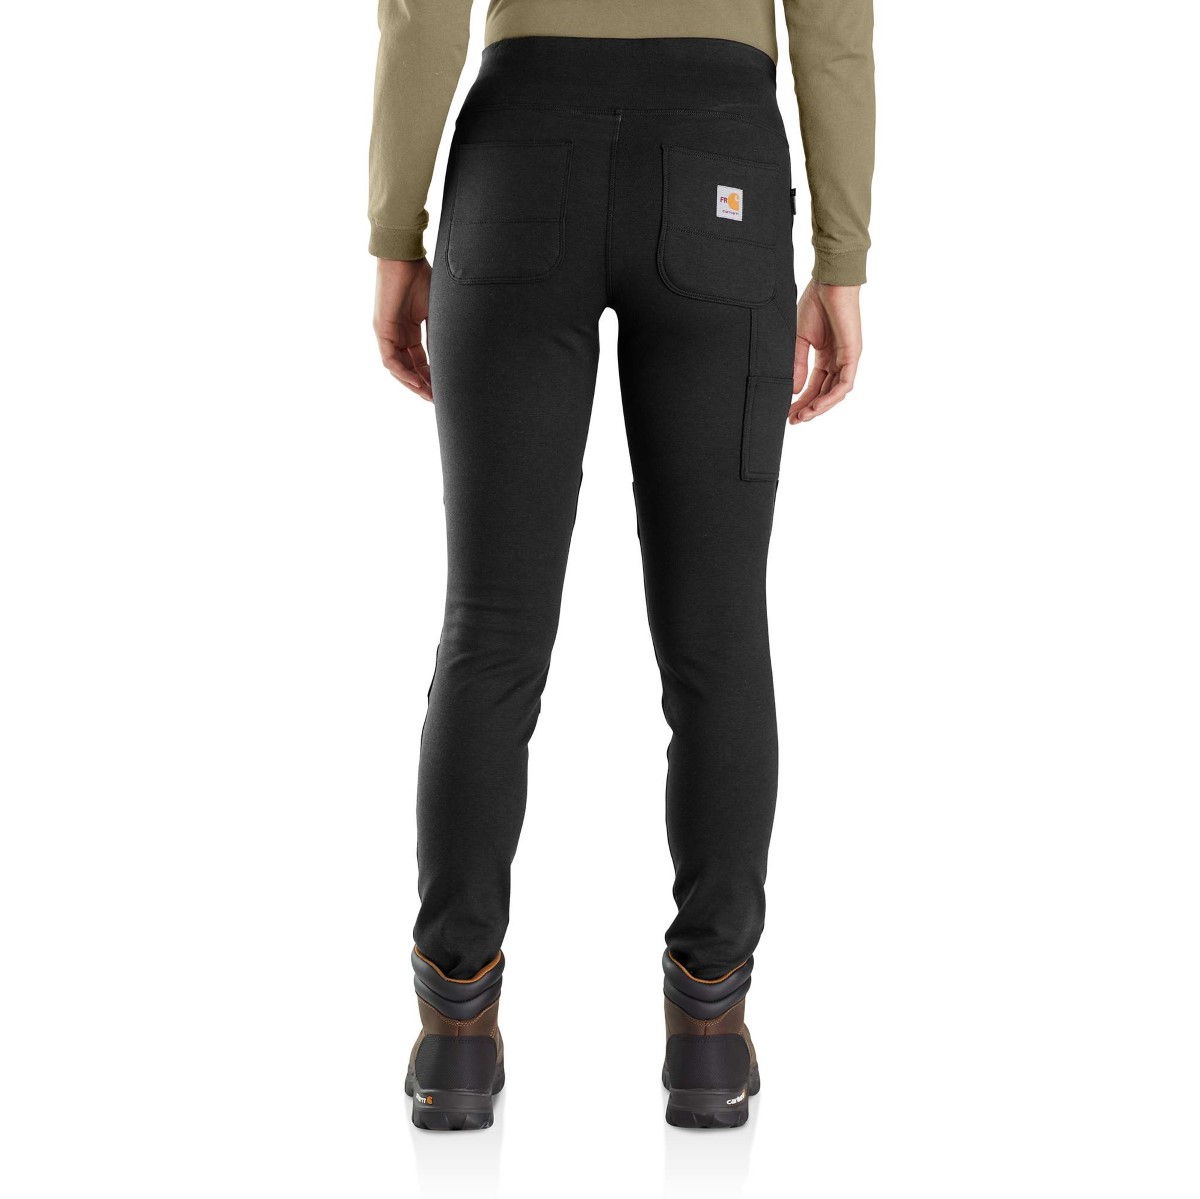 CARHARTT Women's 105283 Flame Resistant Force Fitted Midweight Utility  Leggings - Bob's Stores